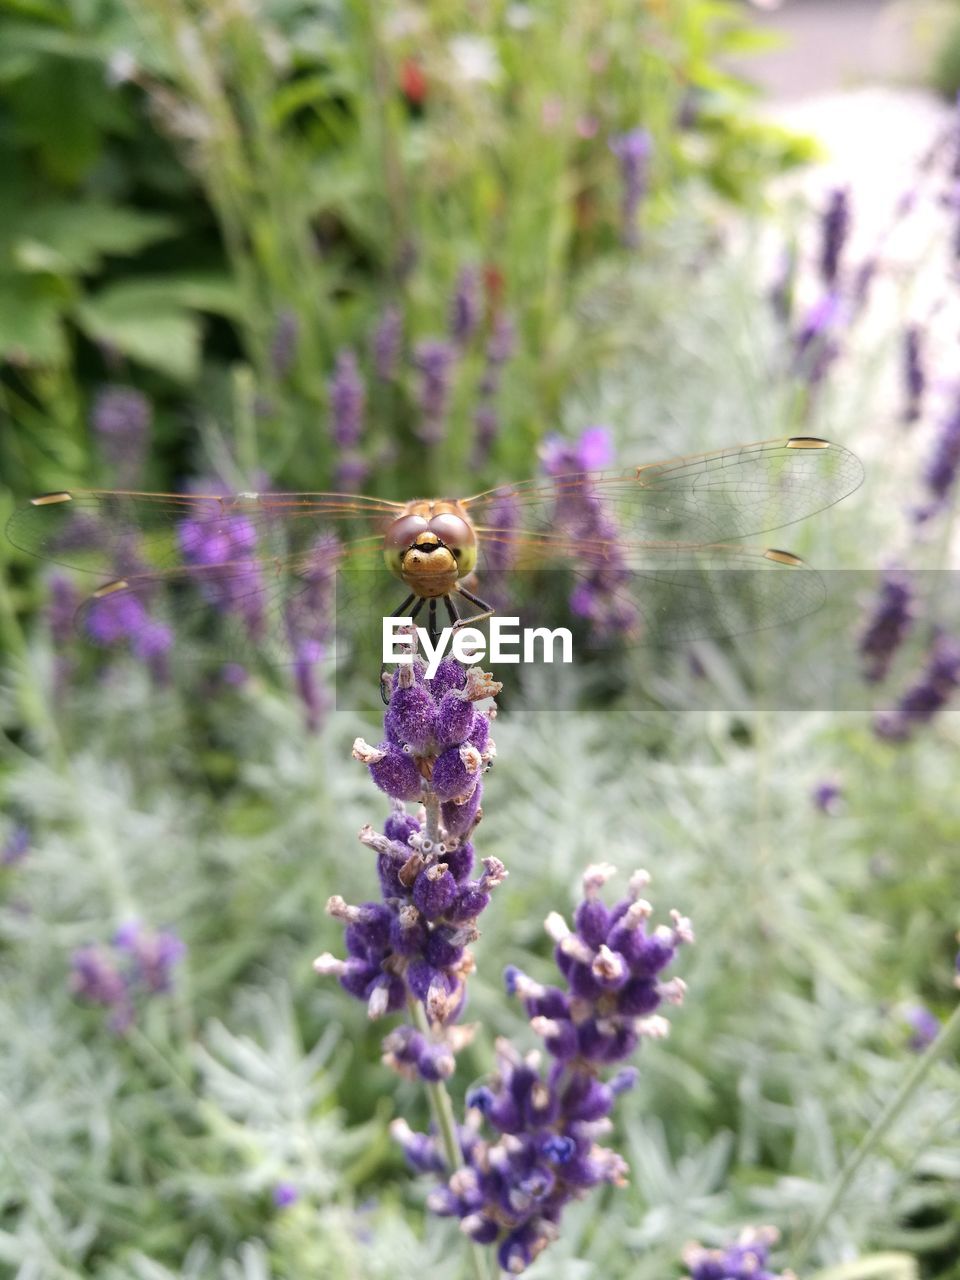 CLOSE-UP OF BEE ON LAVENDER